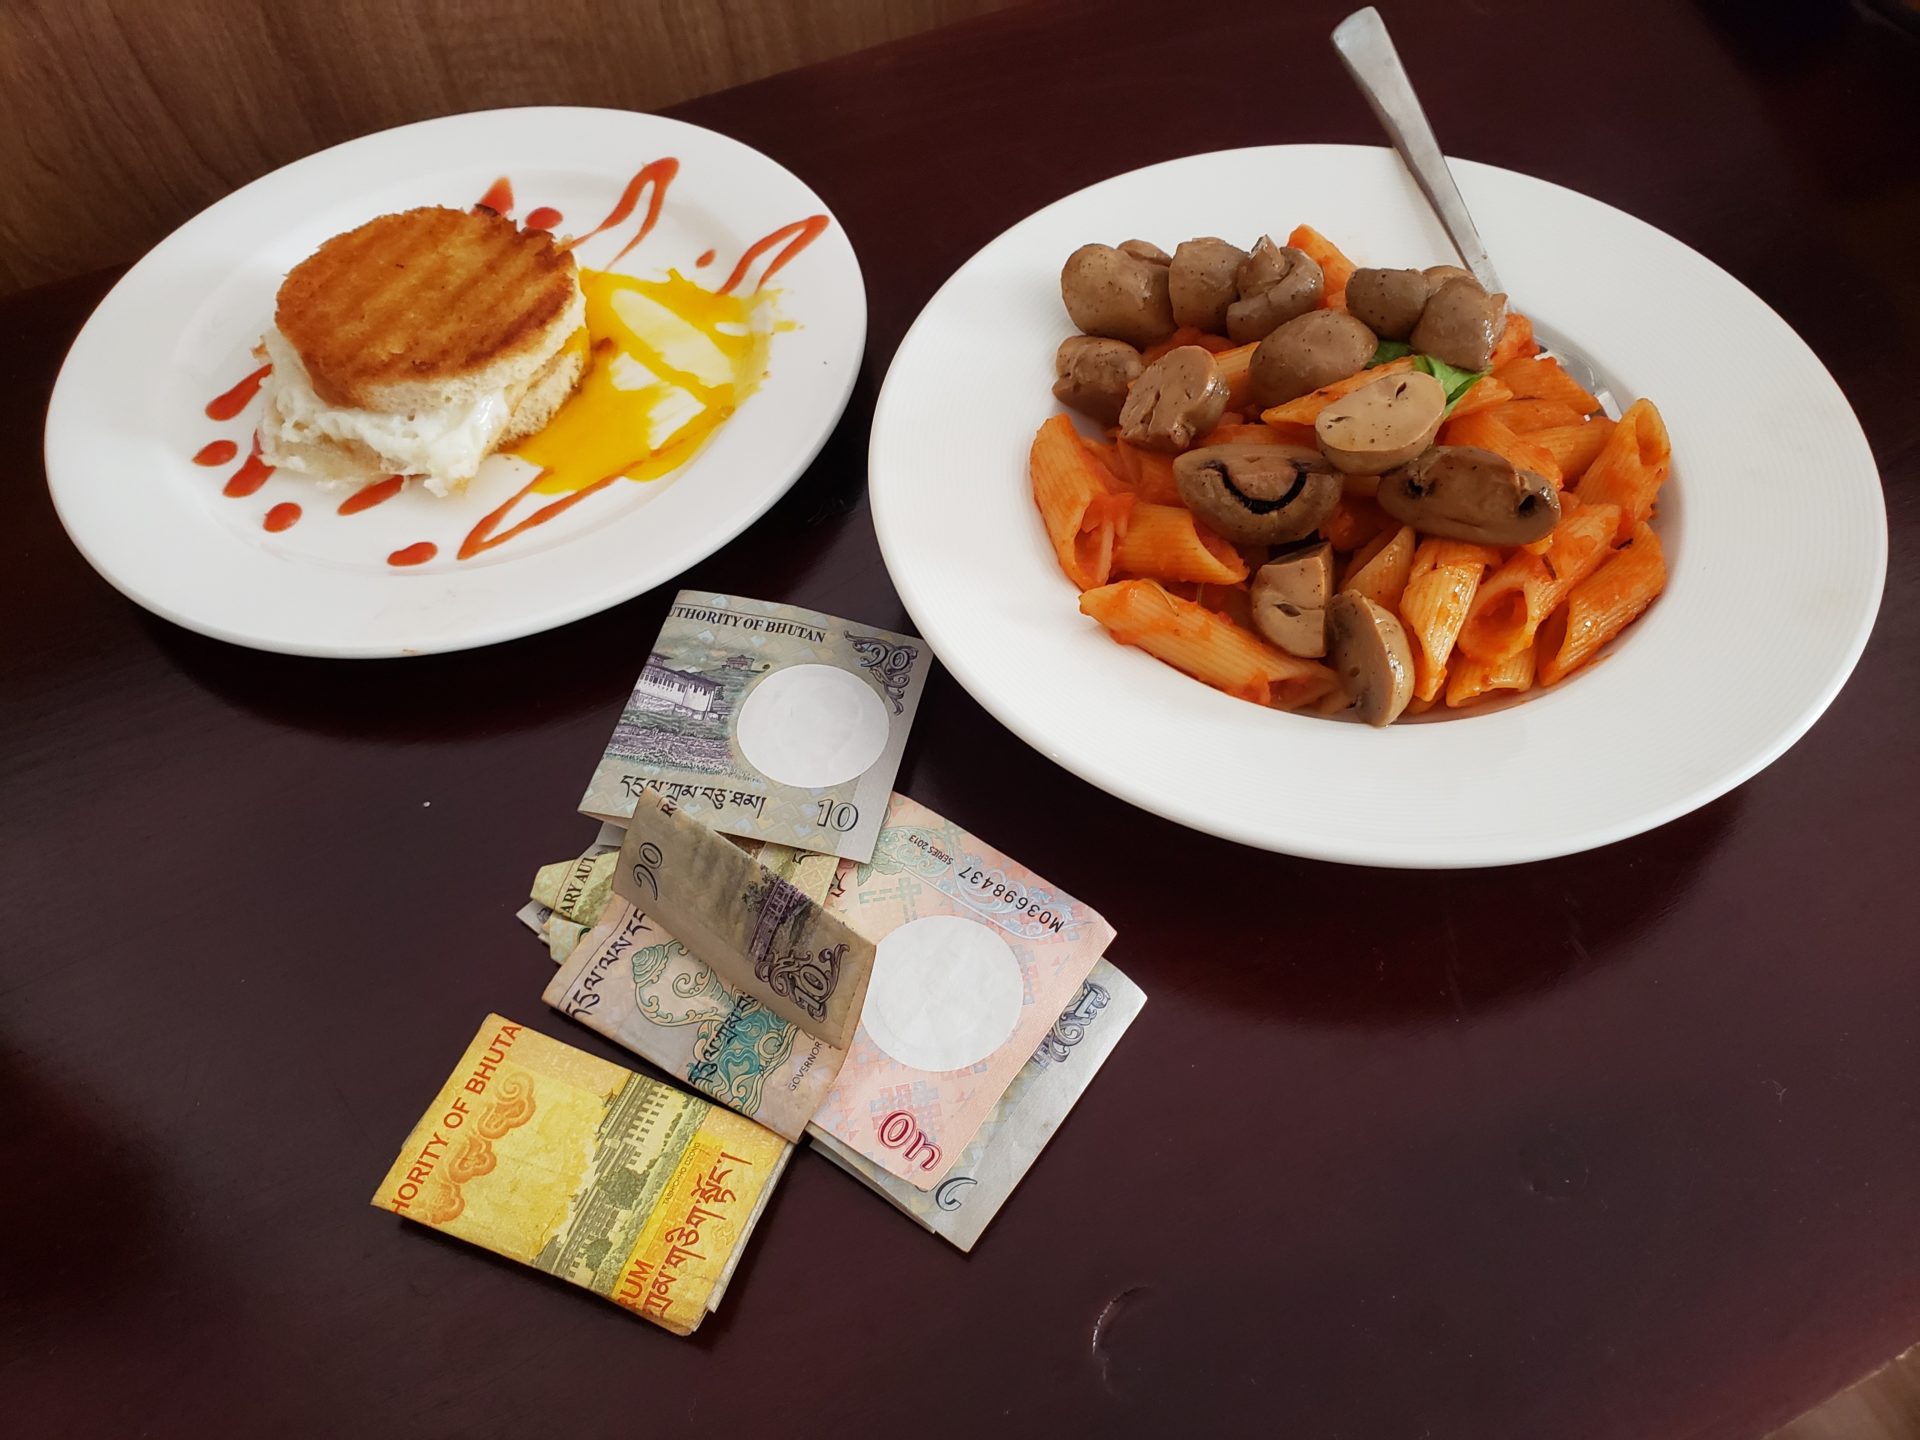 a plate of food and money on a table